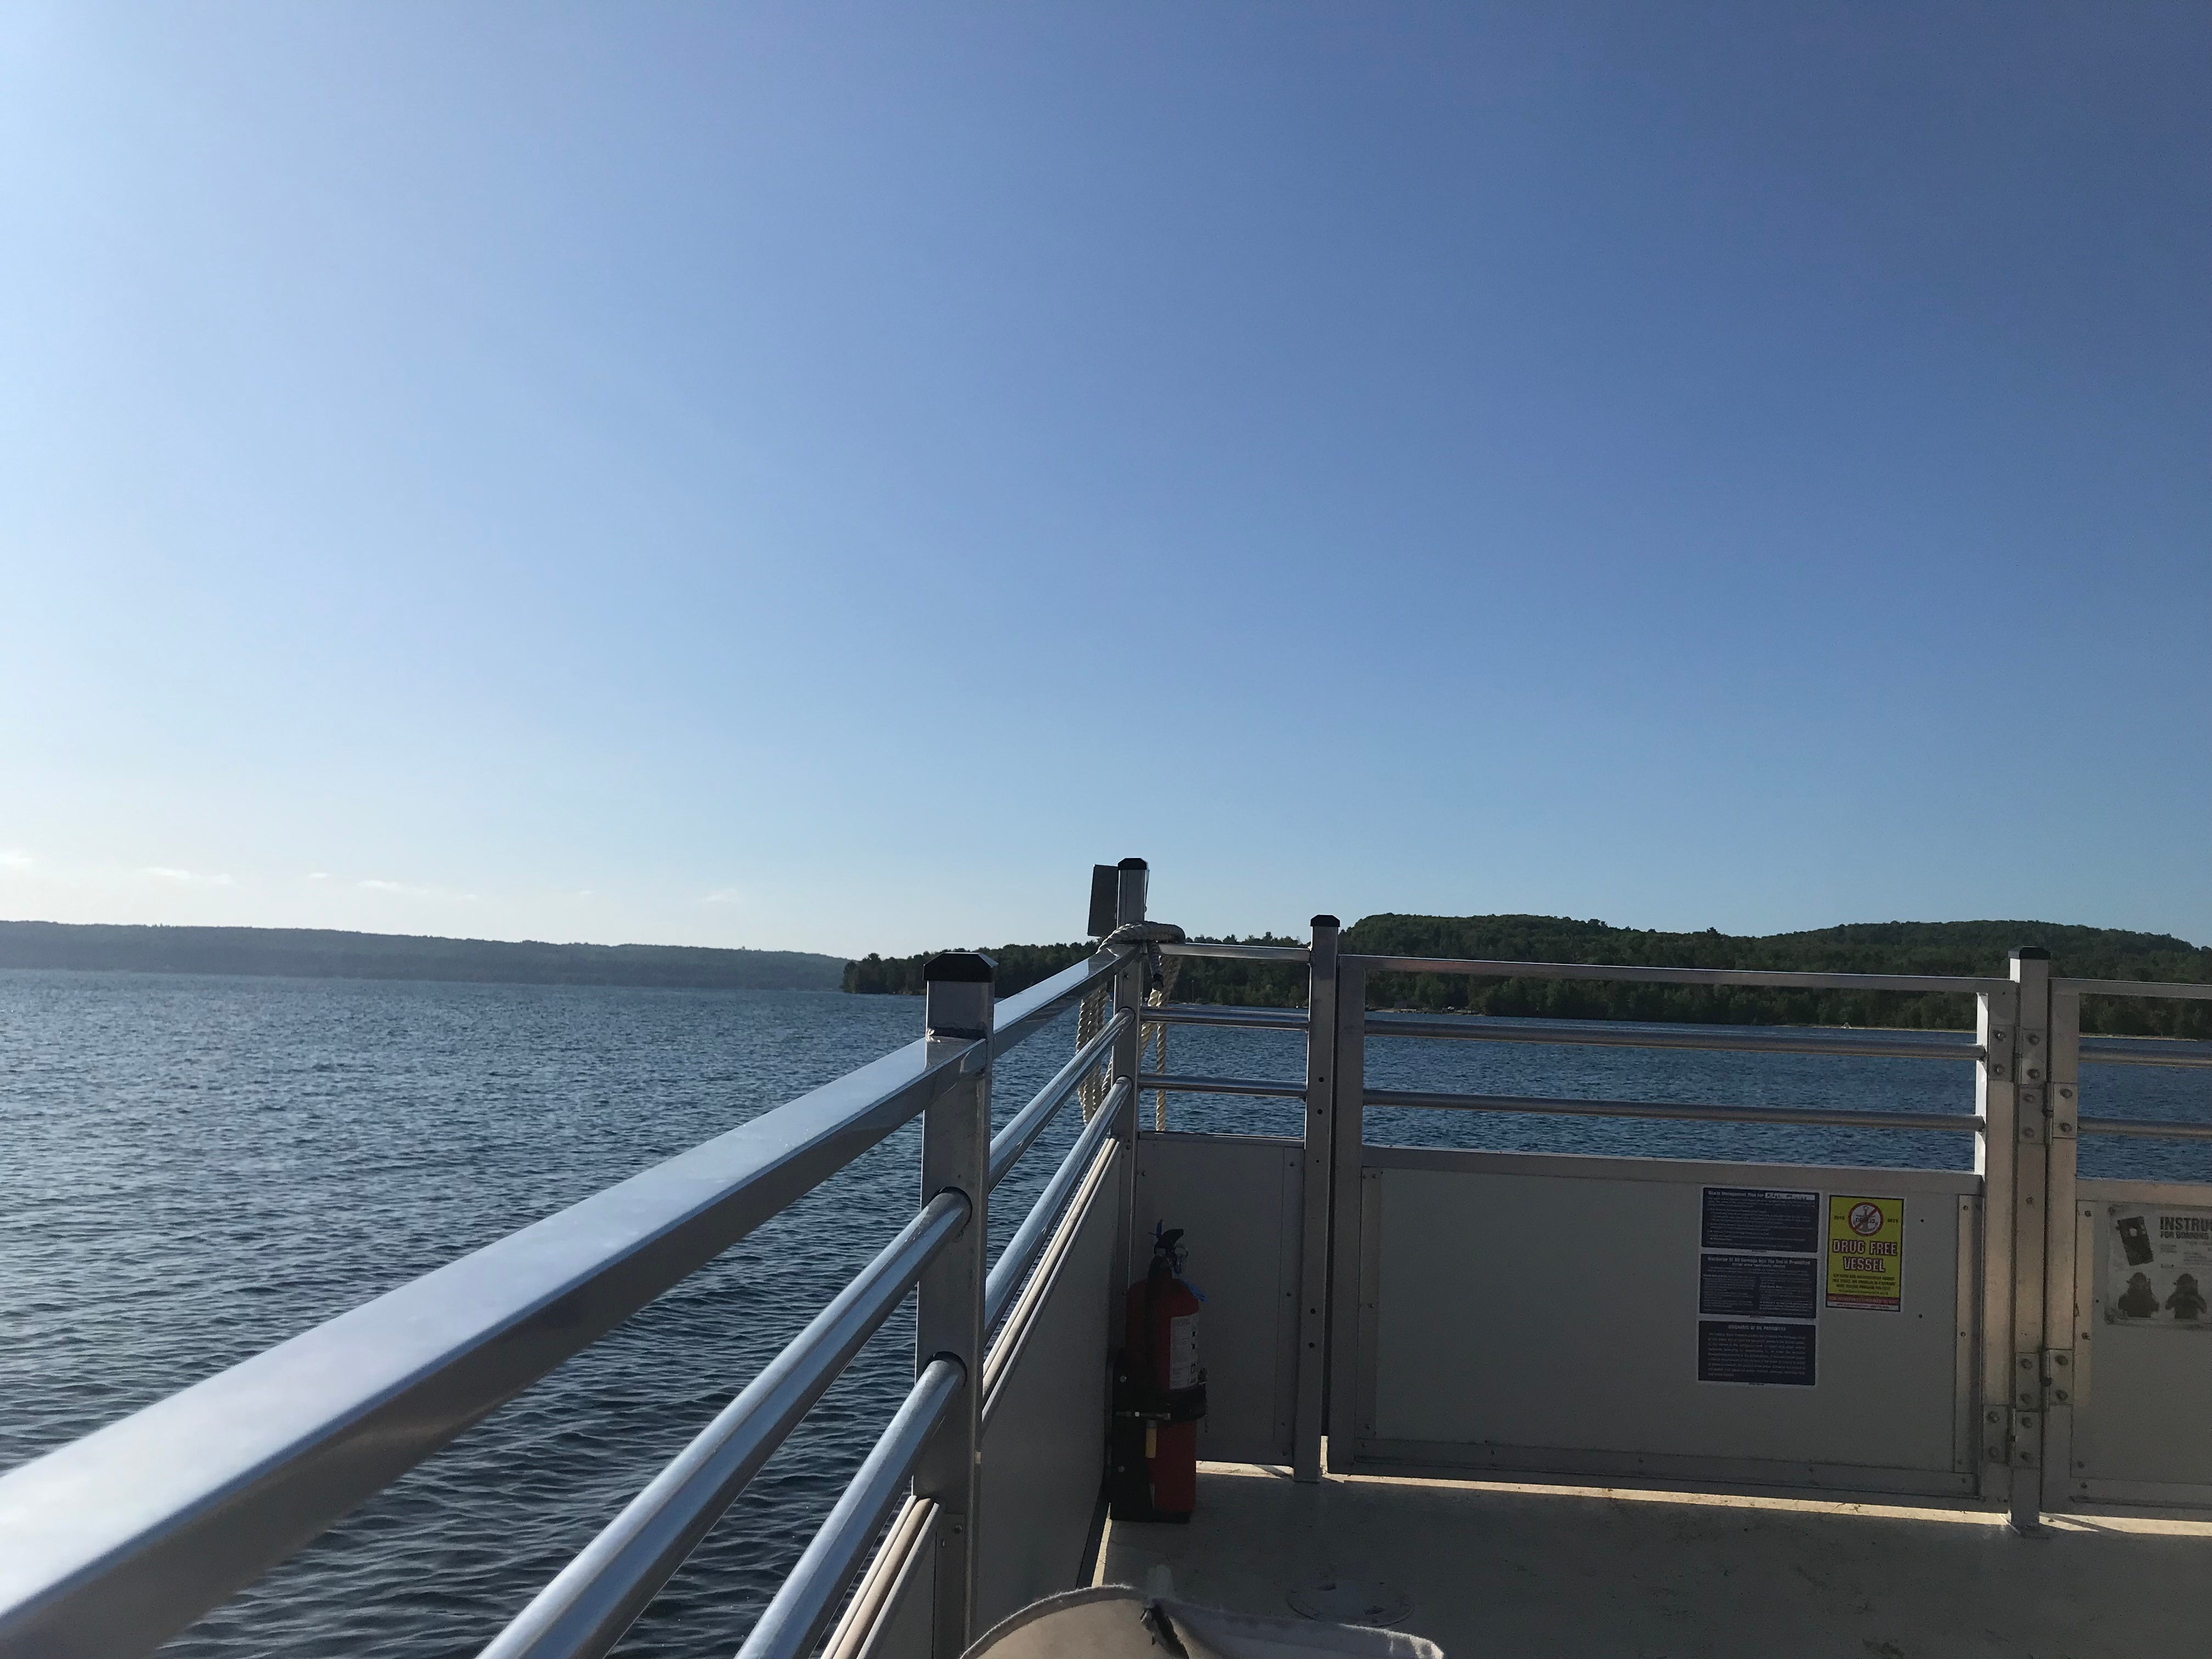 Ferry back to munising - Cost for Ferry is $20 which includes to the island and back and includes $5 recreational fee. Ride is approximately 2 minutes and runs every hour on the hour.